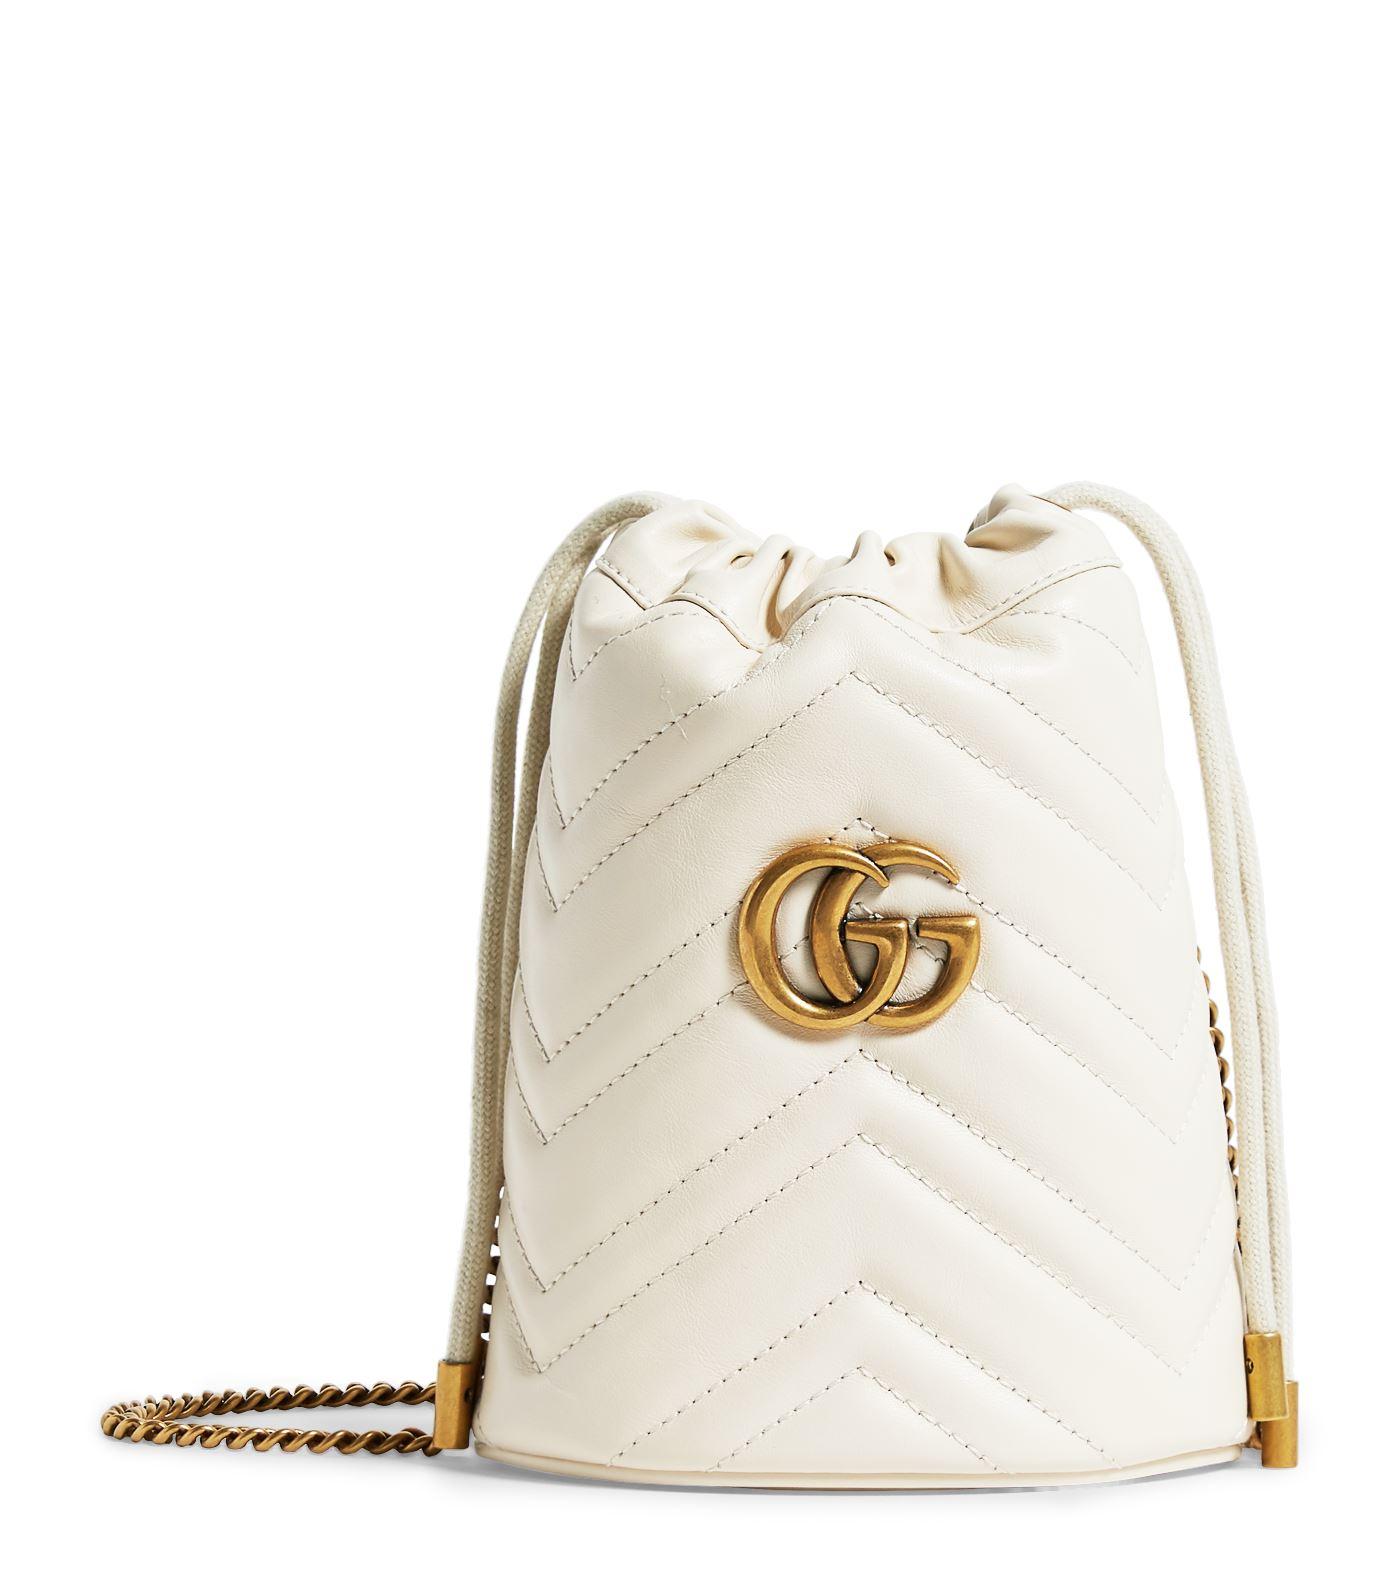 Gucci Mini Leather Marmont Bucket Bag in White - Lyst